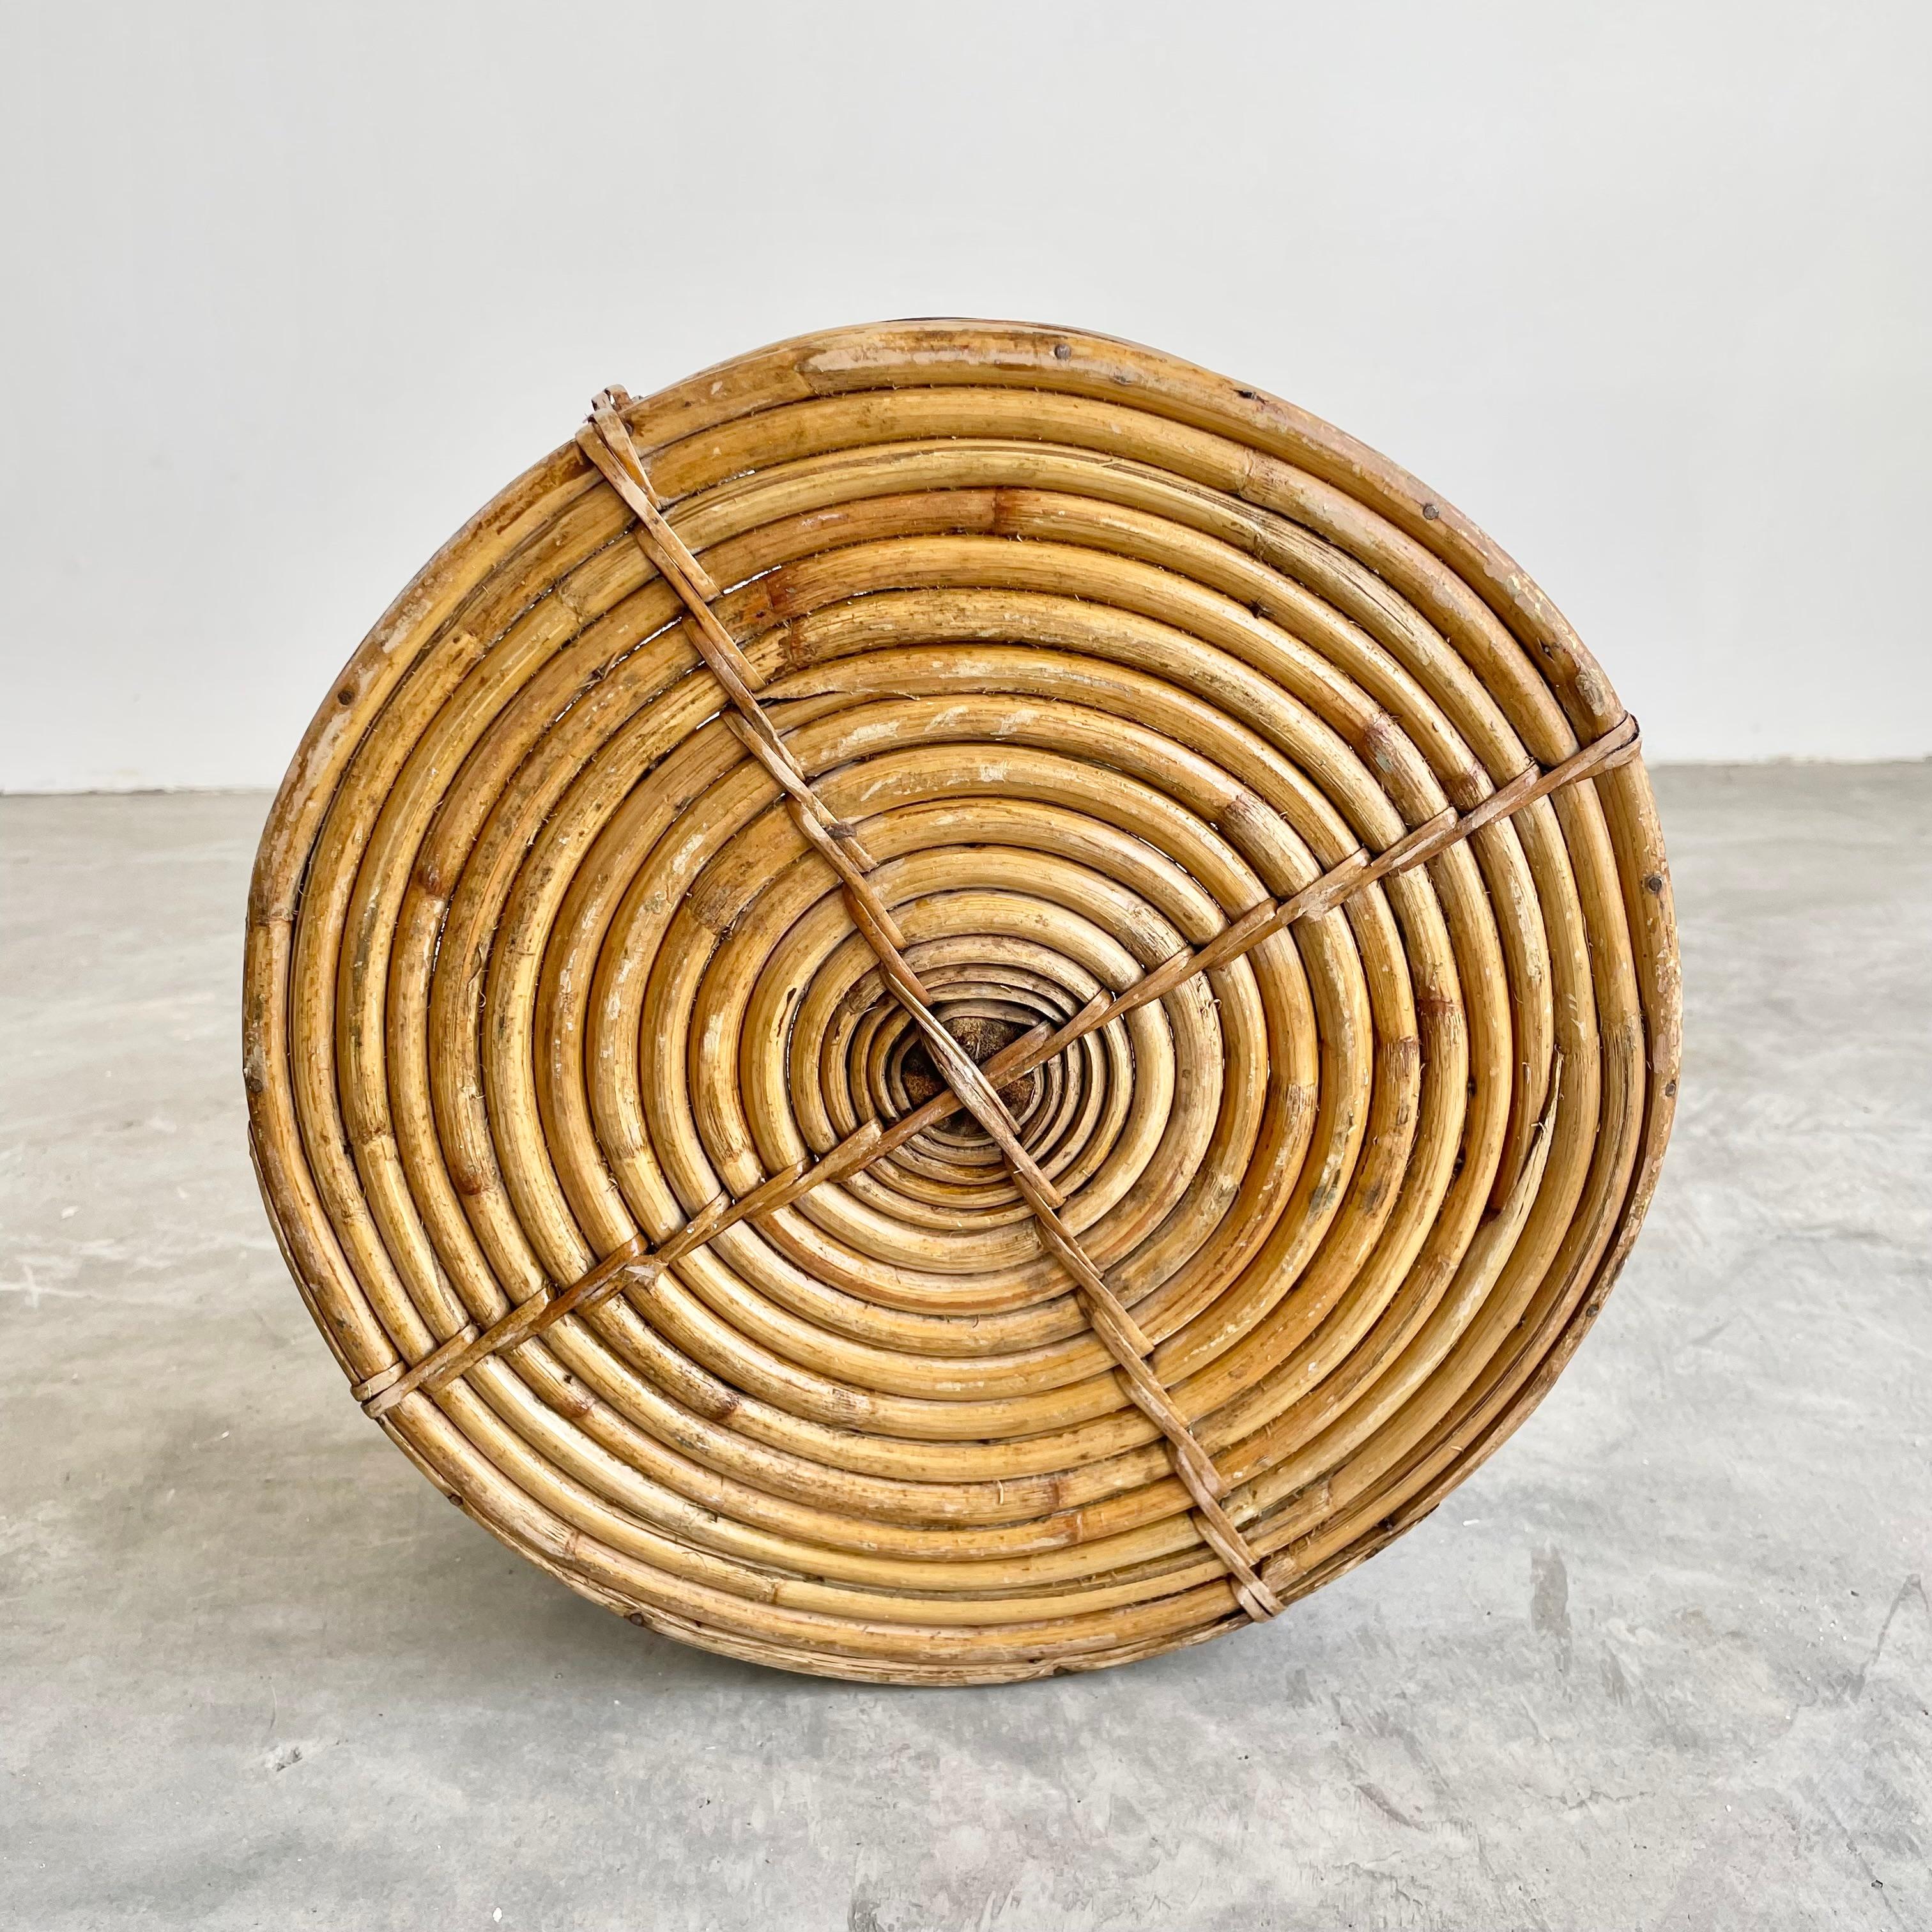 Rattan and Brass Bowl in the Style of Gabriella Crespi, 1960s Italy For Sale 1